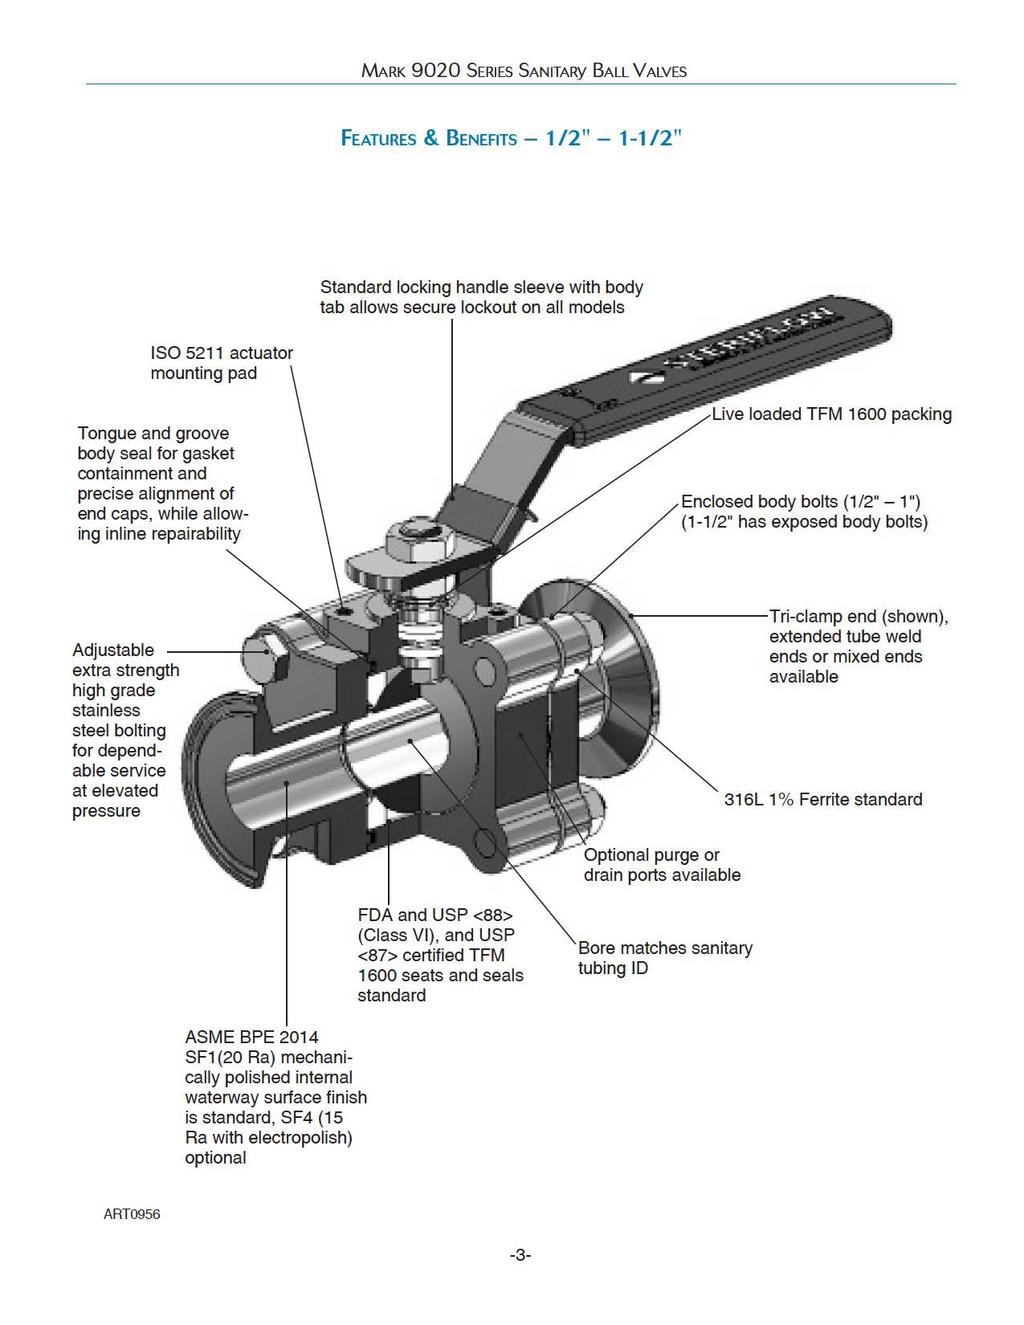 MARK 9020 S ERES SANTARY BALL VALVES FEATURES & BENEFTS - 1 /2" - 1-1 /2" Standard locking handle sleeve with body tab allows secure lockout on all models SO 5211 actuator mounting pad Tongue and